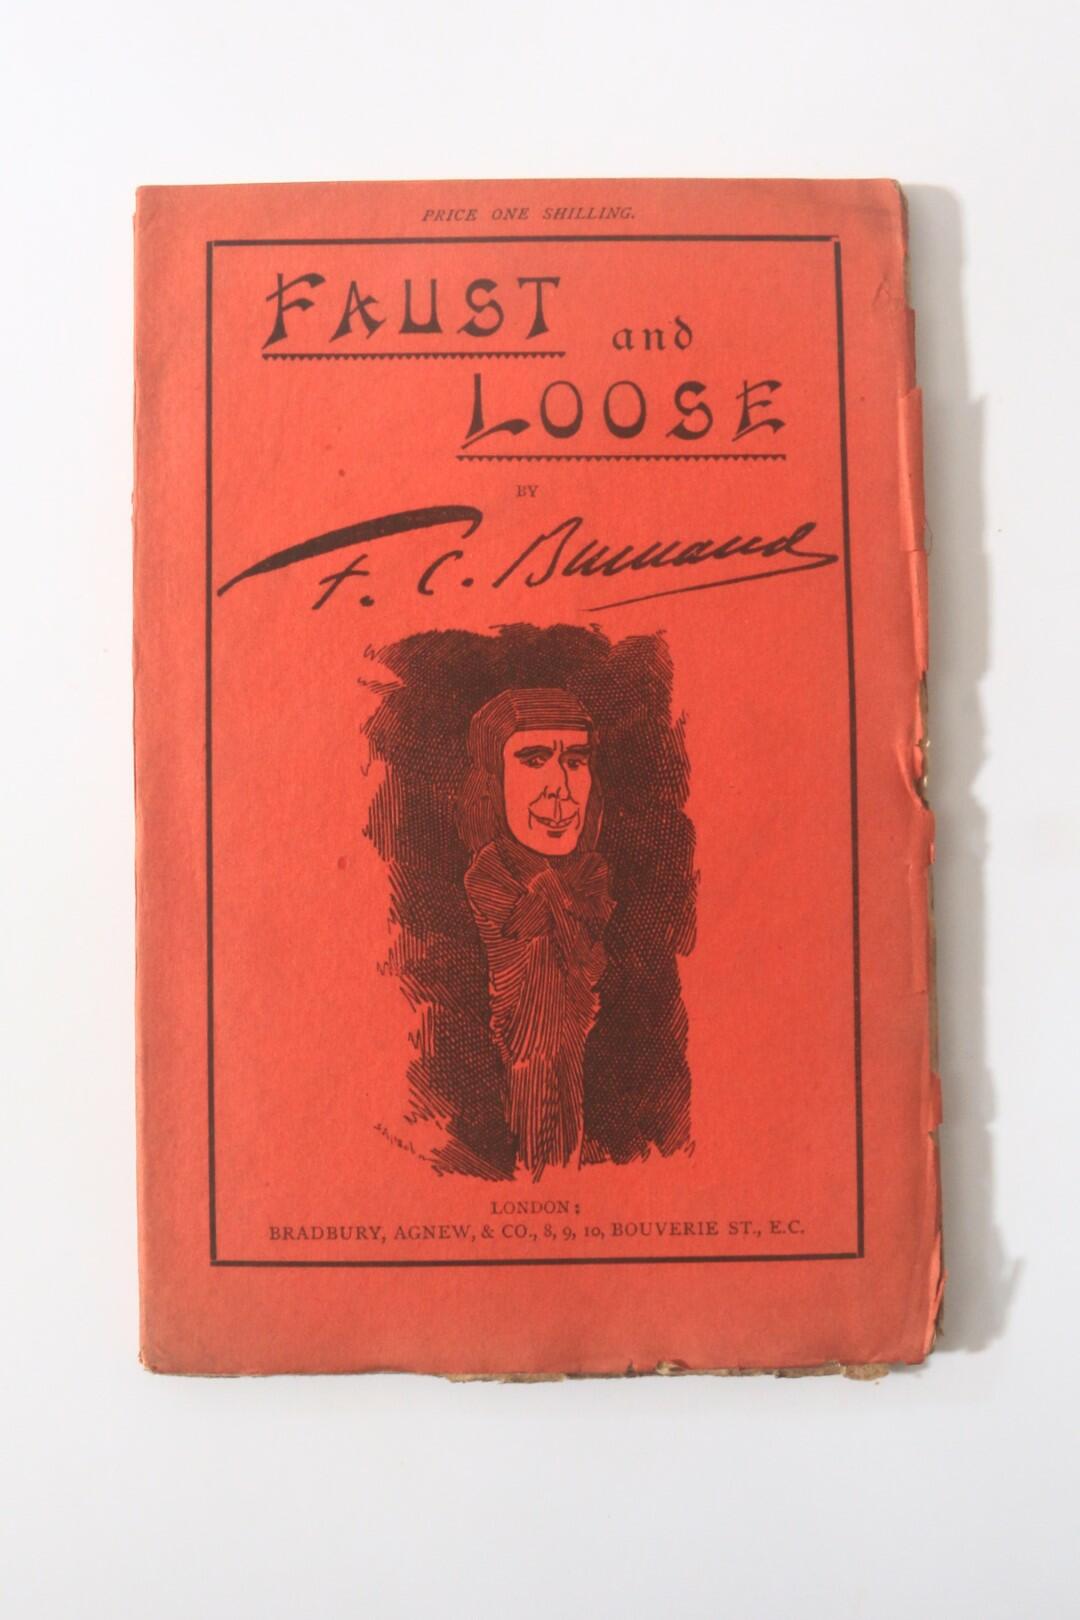 F.C. Burnand - Faust and Loose - Bradbury, Agnew & Co., n.d. [1886], First Edition.